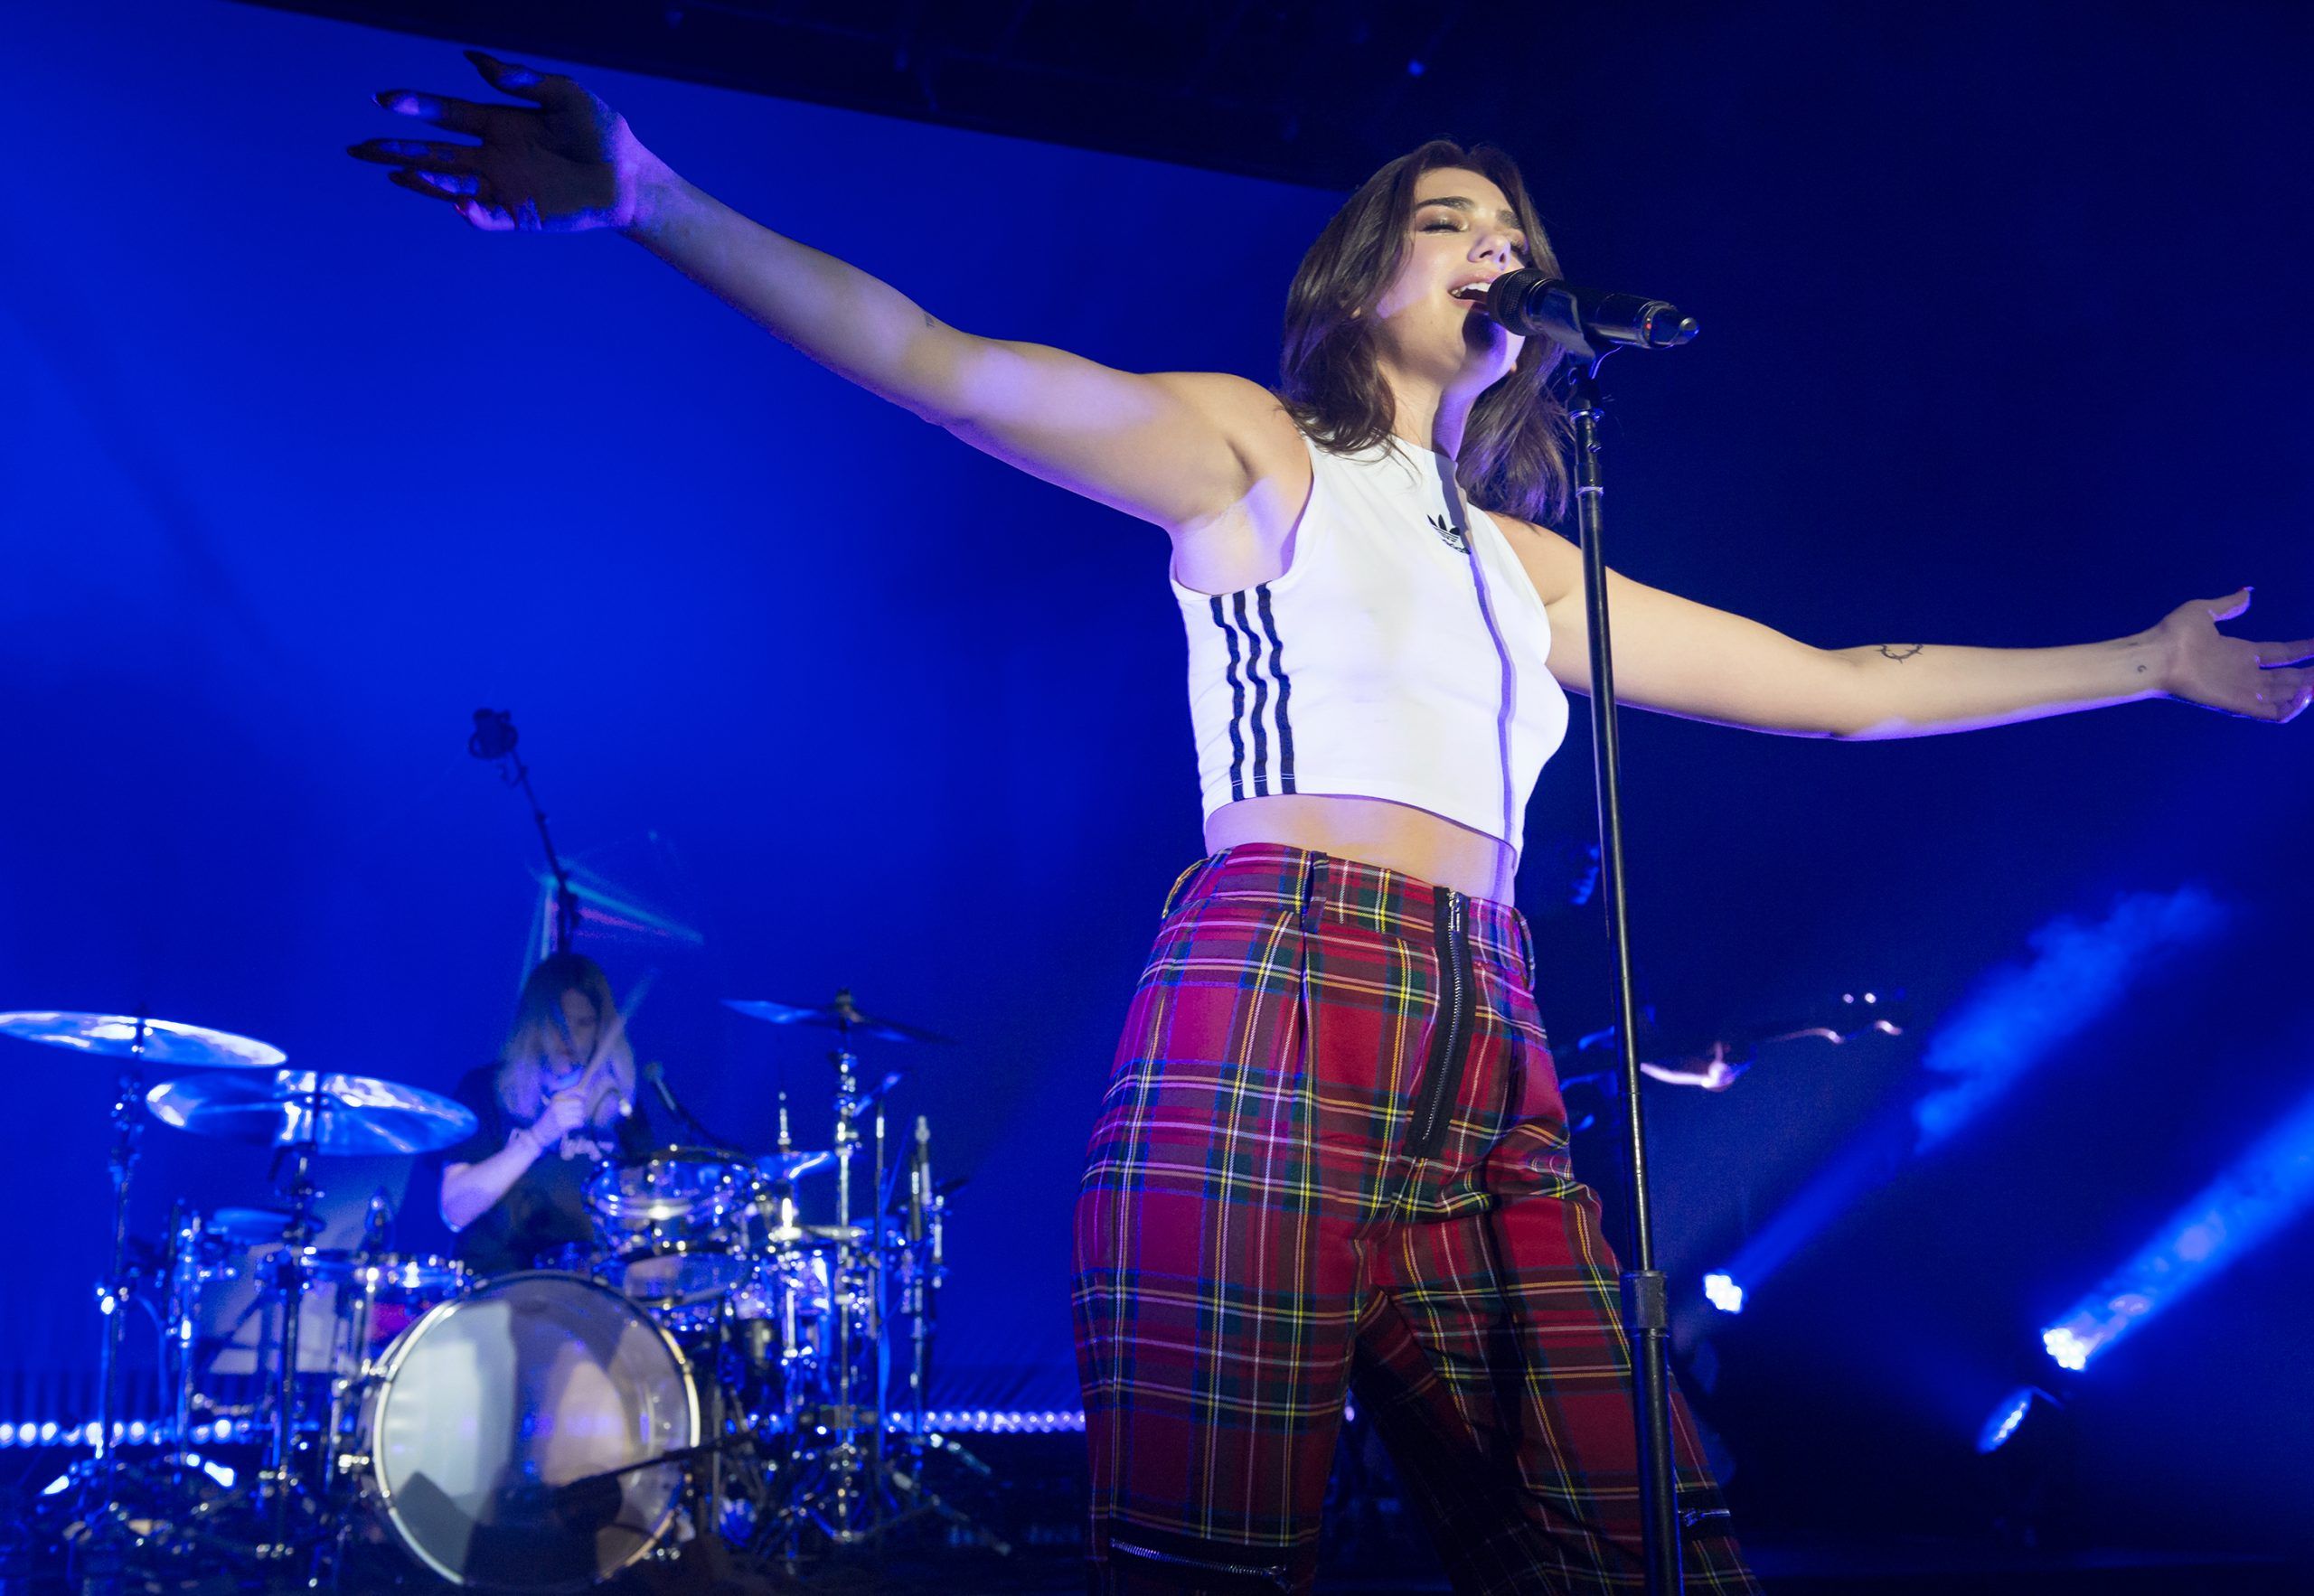 Extra Roskilde tickets added so more youngsters can see Dua Lipa and co